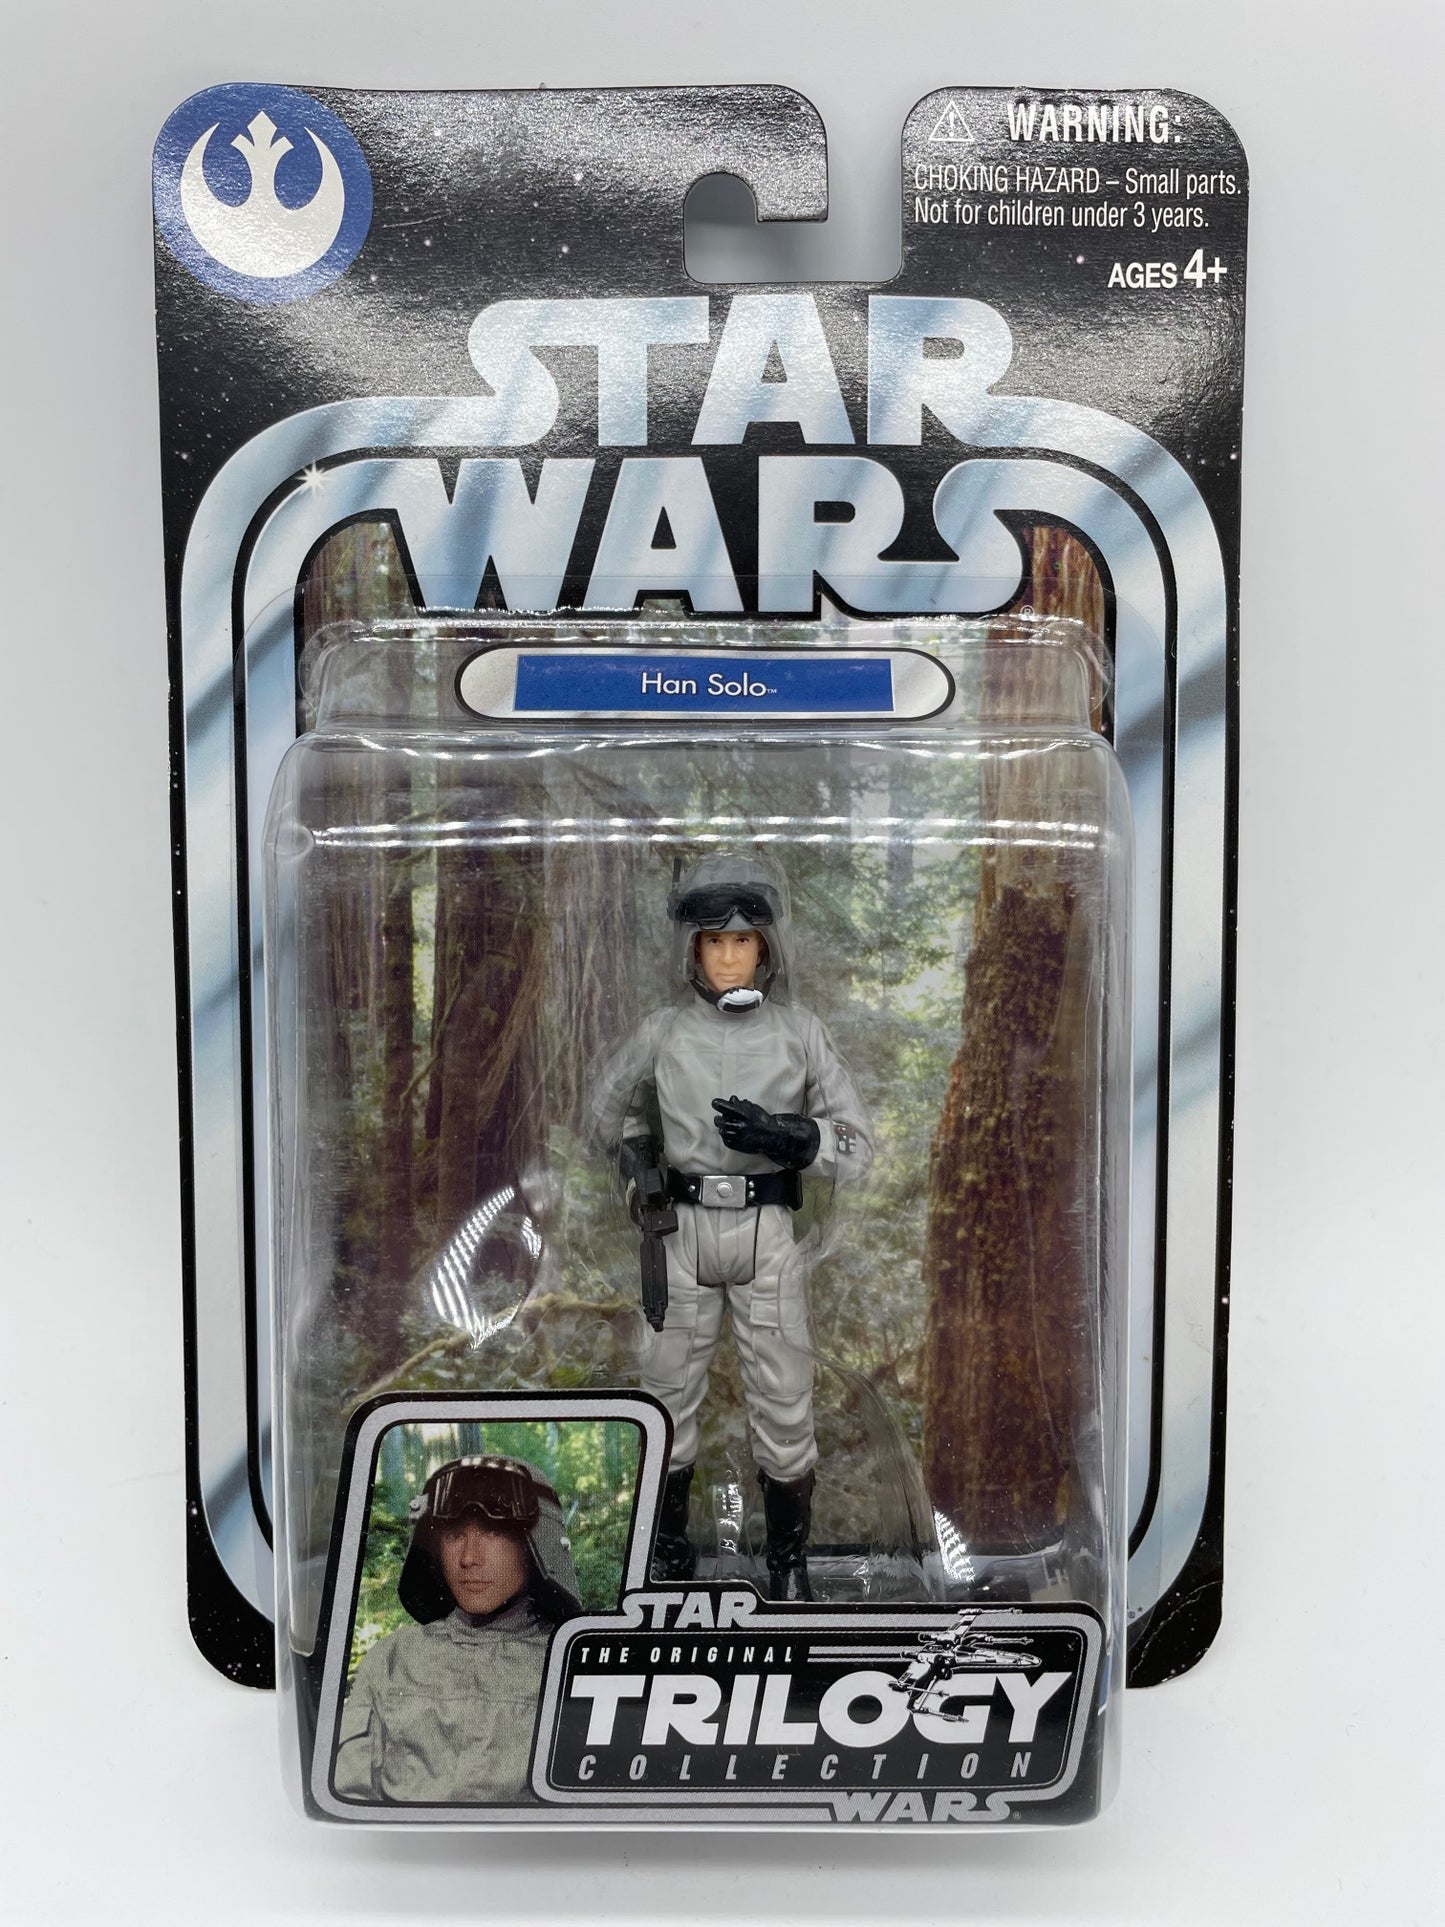 Original Trilogy Collection Han Solo AT-ST Driver Figure, Hasbro 2004